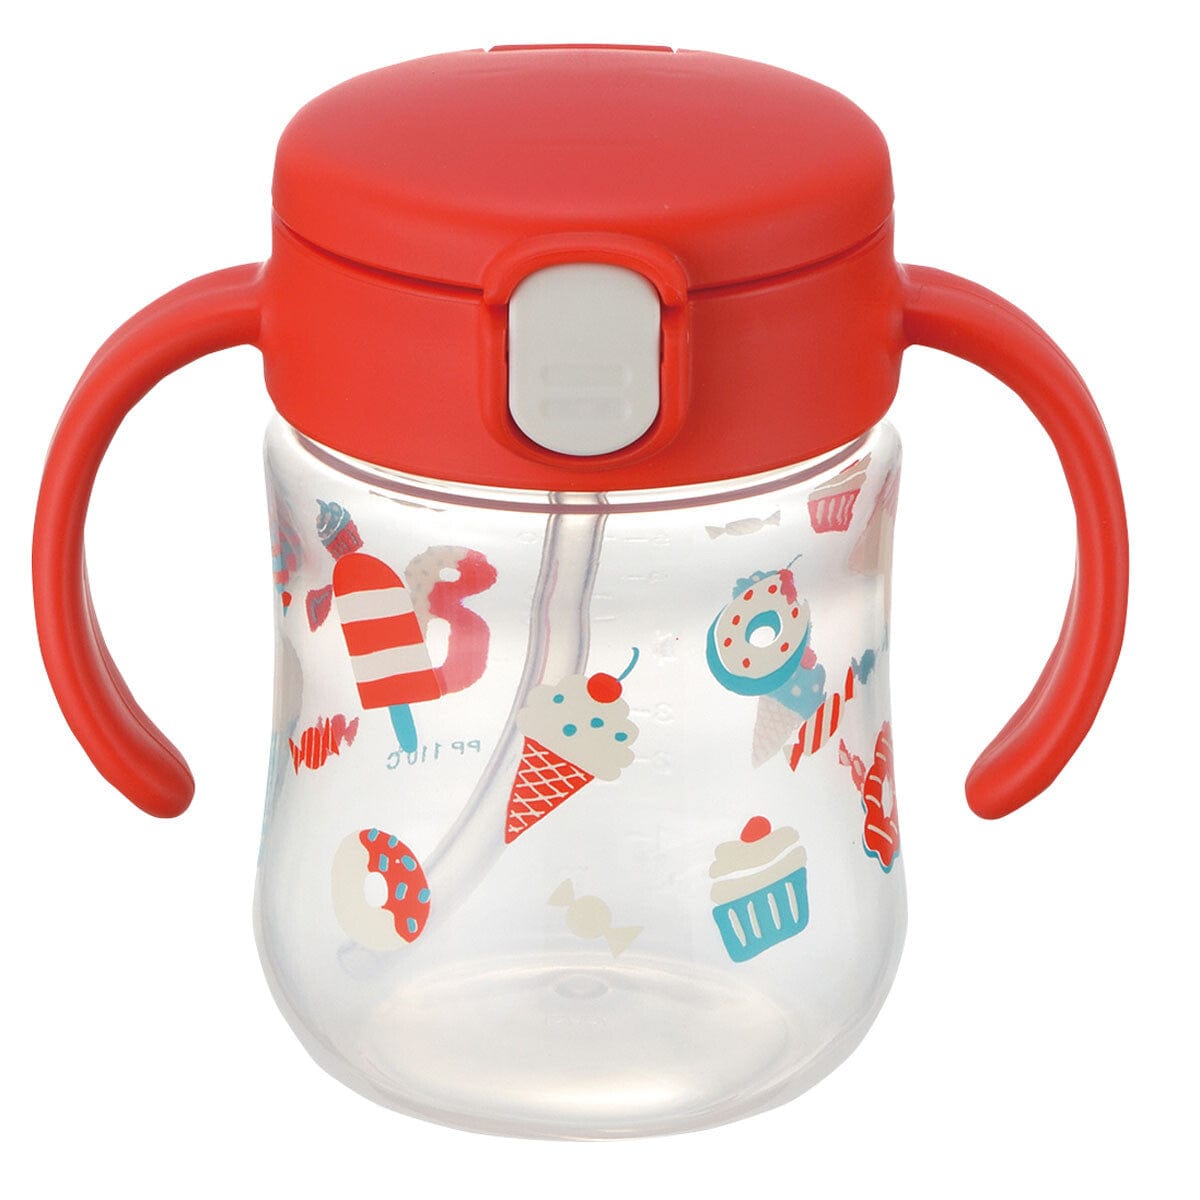 Richell - T.L.I Baby Stage 2 Try Straw Clear Training Water Bottle Mug - Red Baby Water Bottle 4945680203531 Durio.sg